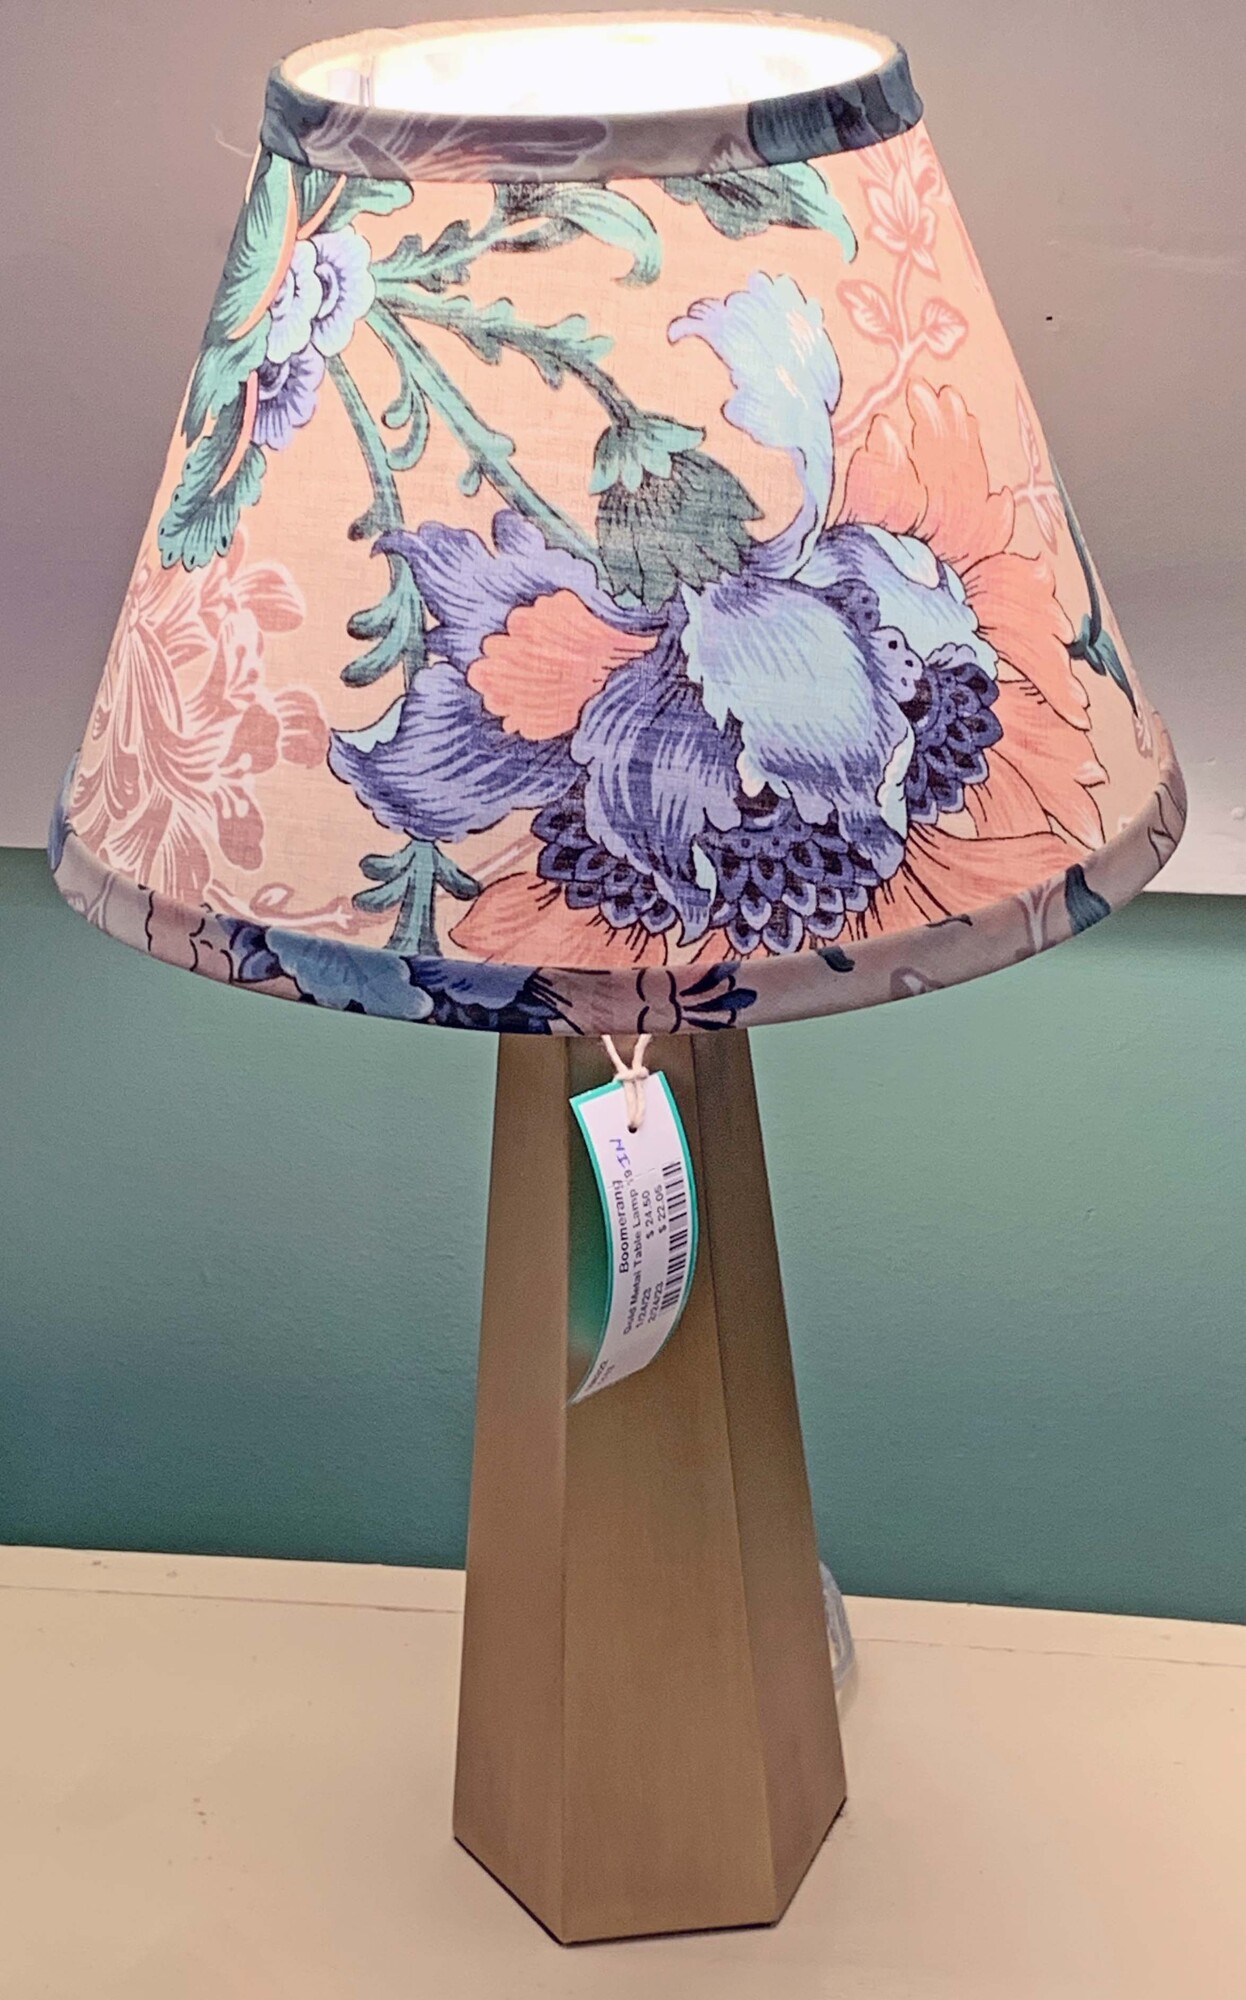 Gold Metal Table Lamp with Floral Shade - $24.50.
19 In Tall.